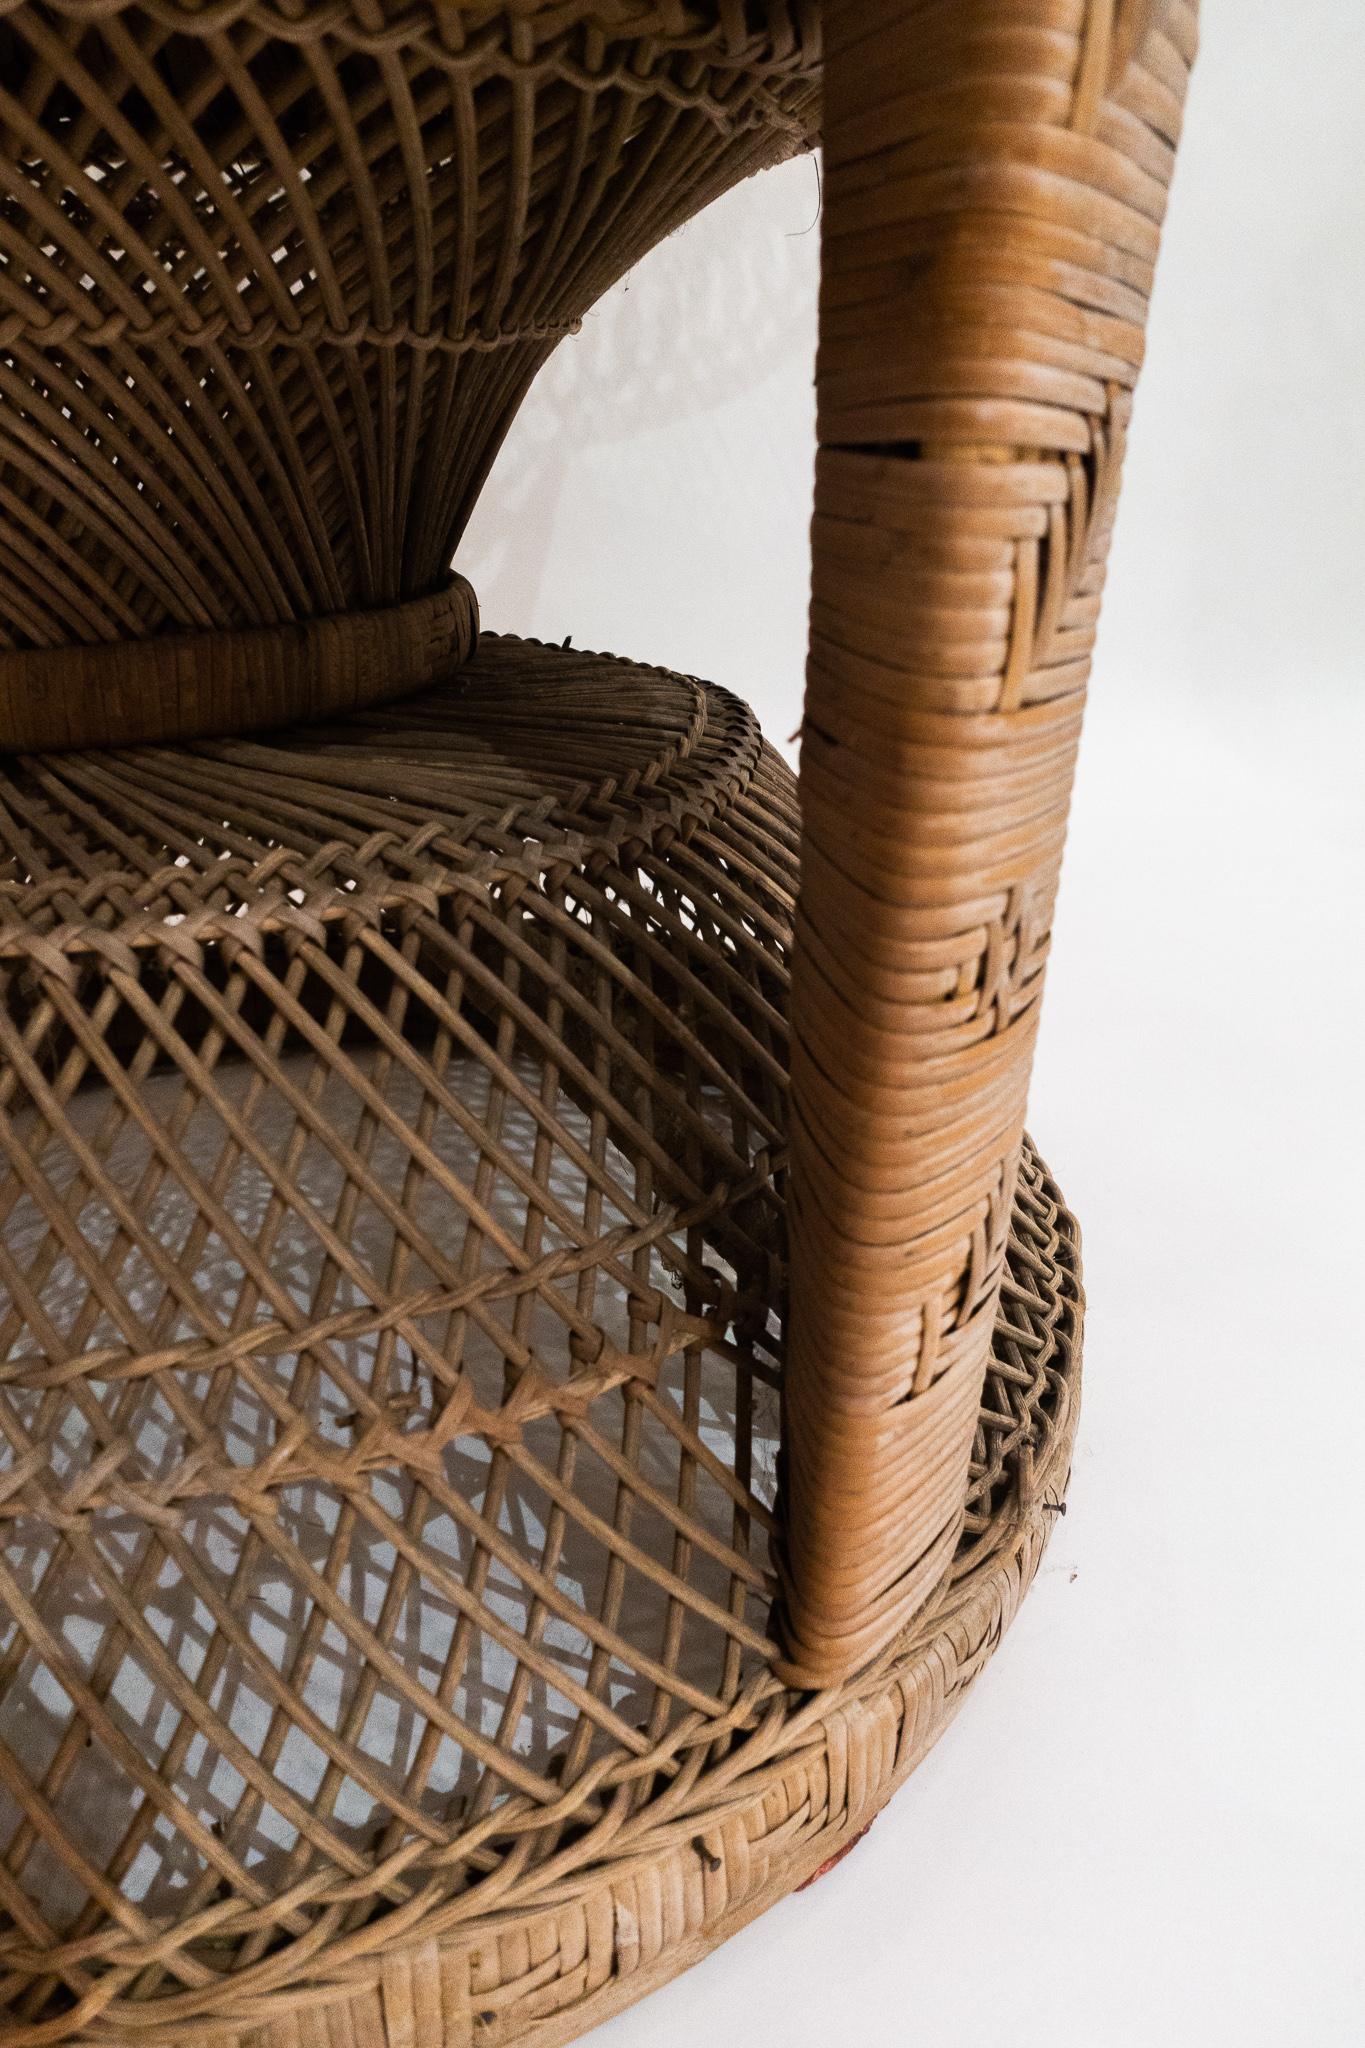 Mid-Century Modern Classic Wicker Emanuelle Peacock Chair, 1970